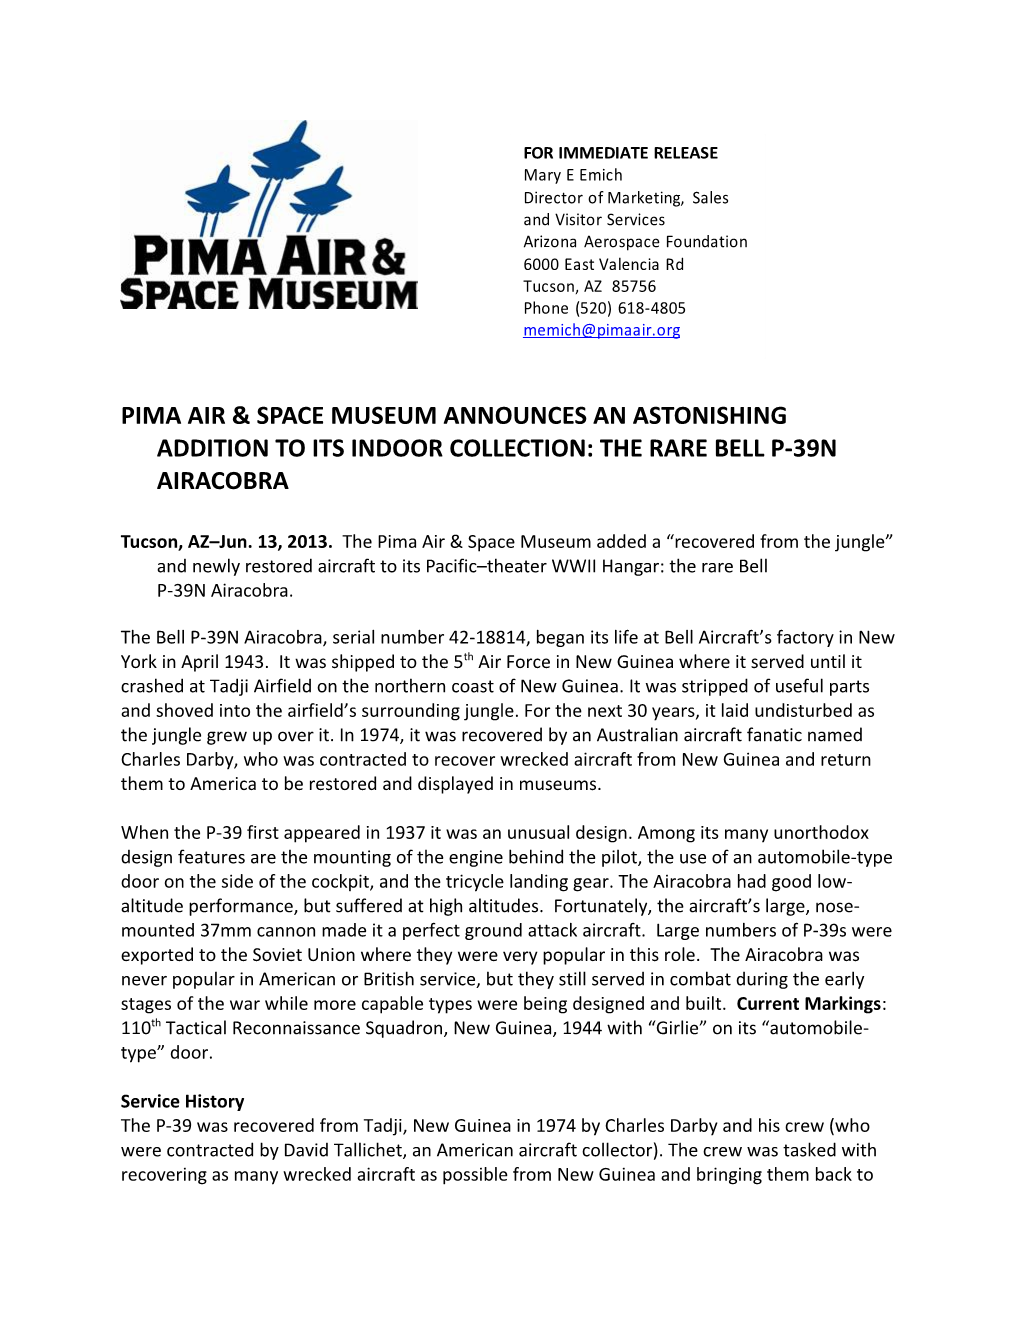 Pima Air & Space Museum Announces an Astonishing Addition to Its Indoor Collection: The